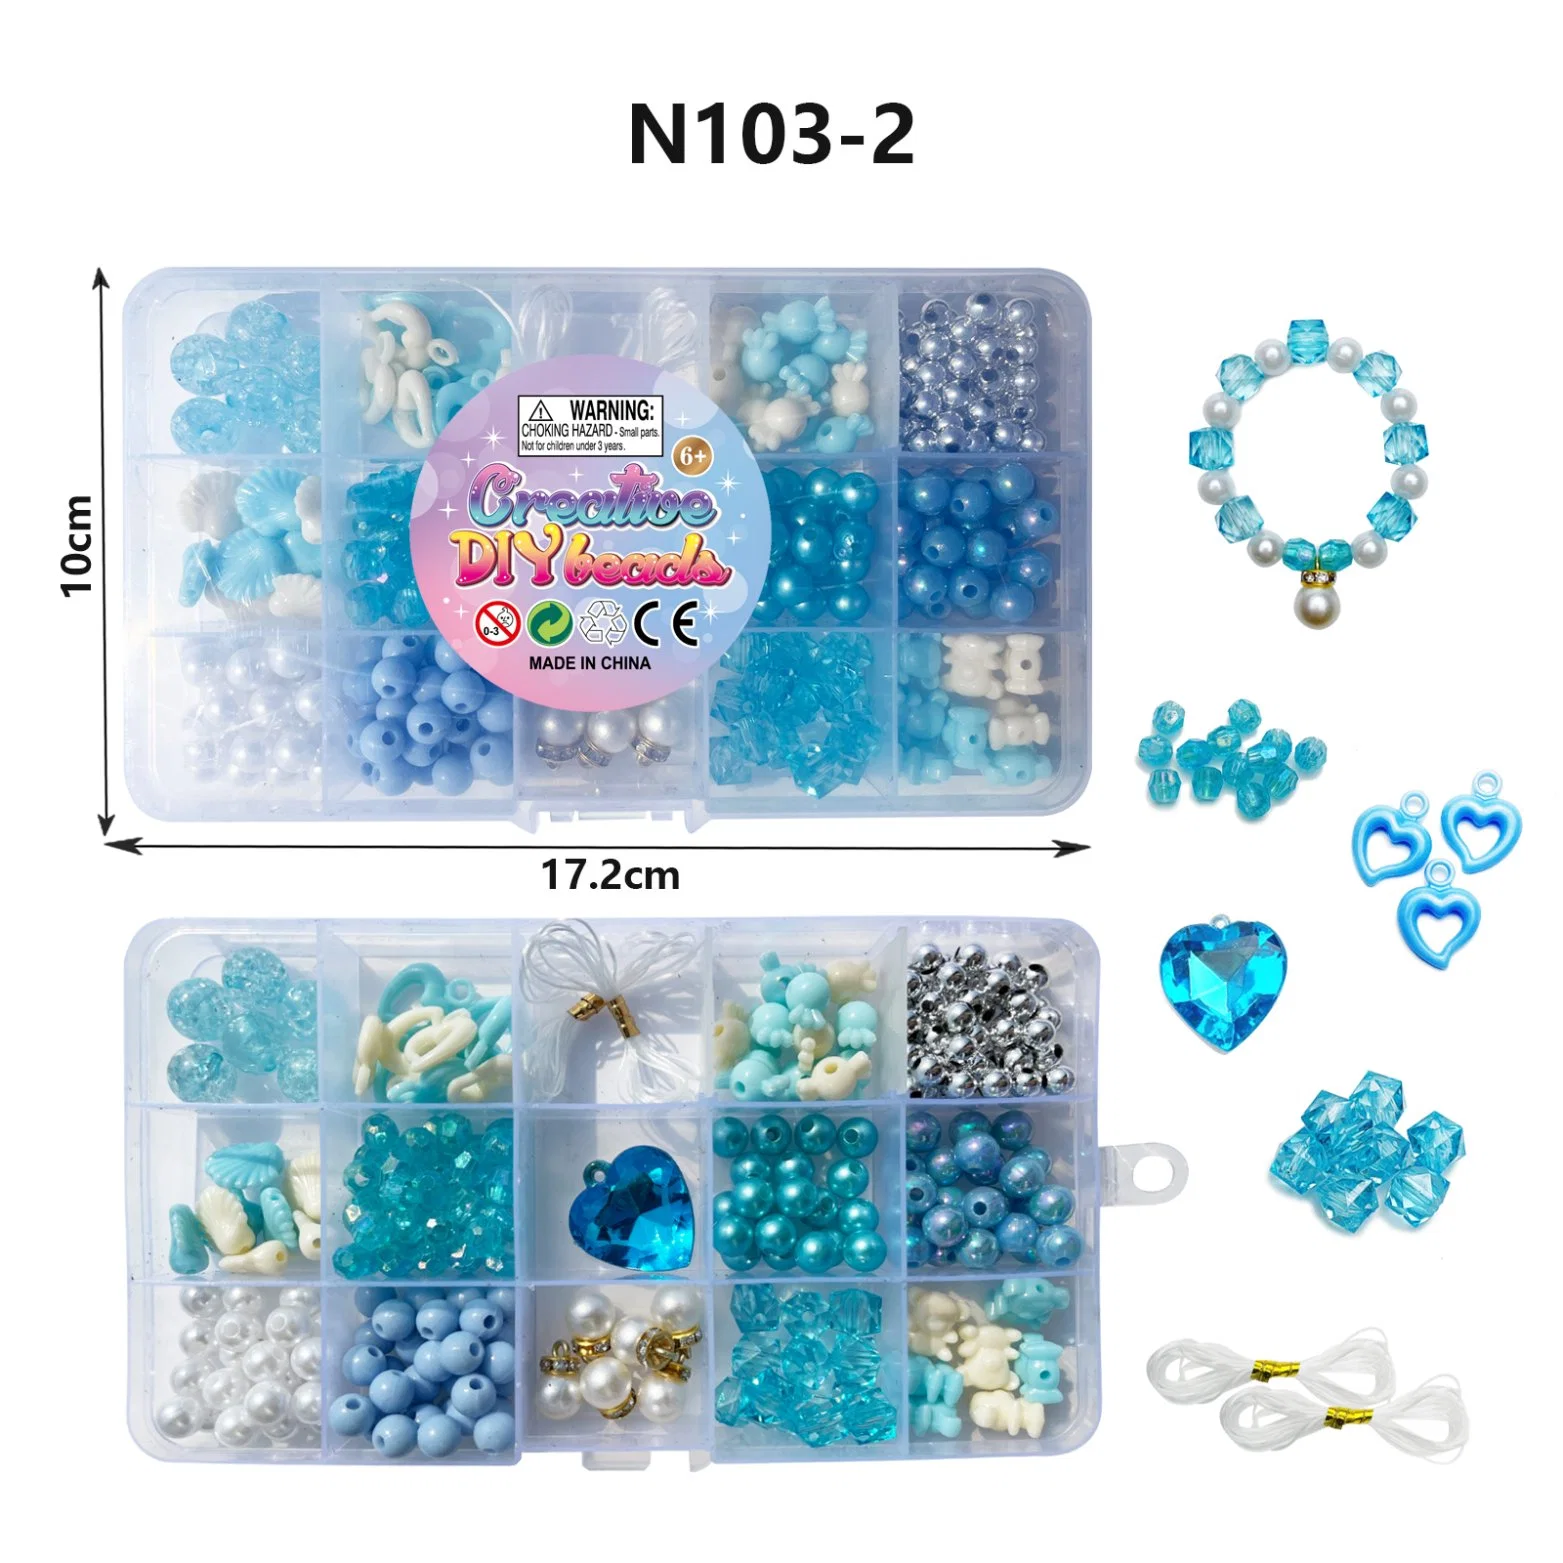 Colourful Bead Jewelry Set Birthday Gifts Promotional Toys Educational Toys